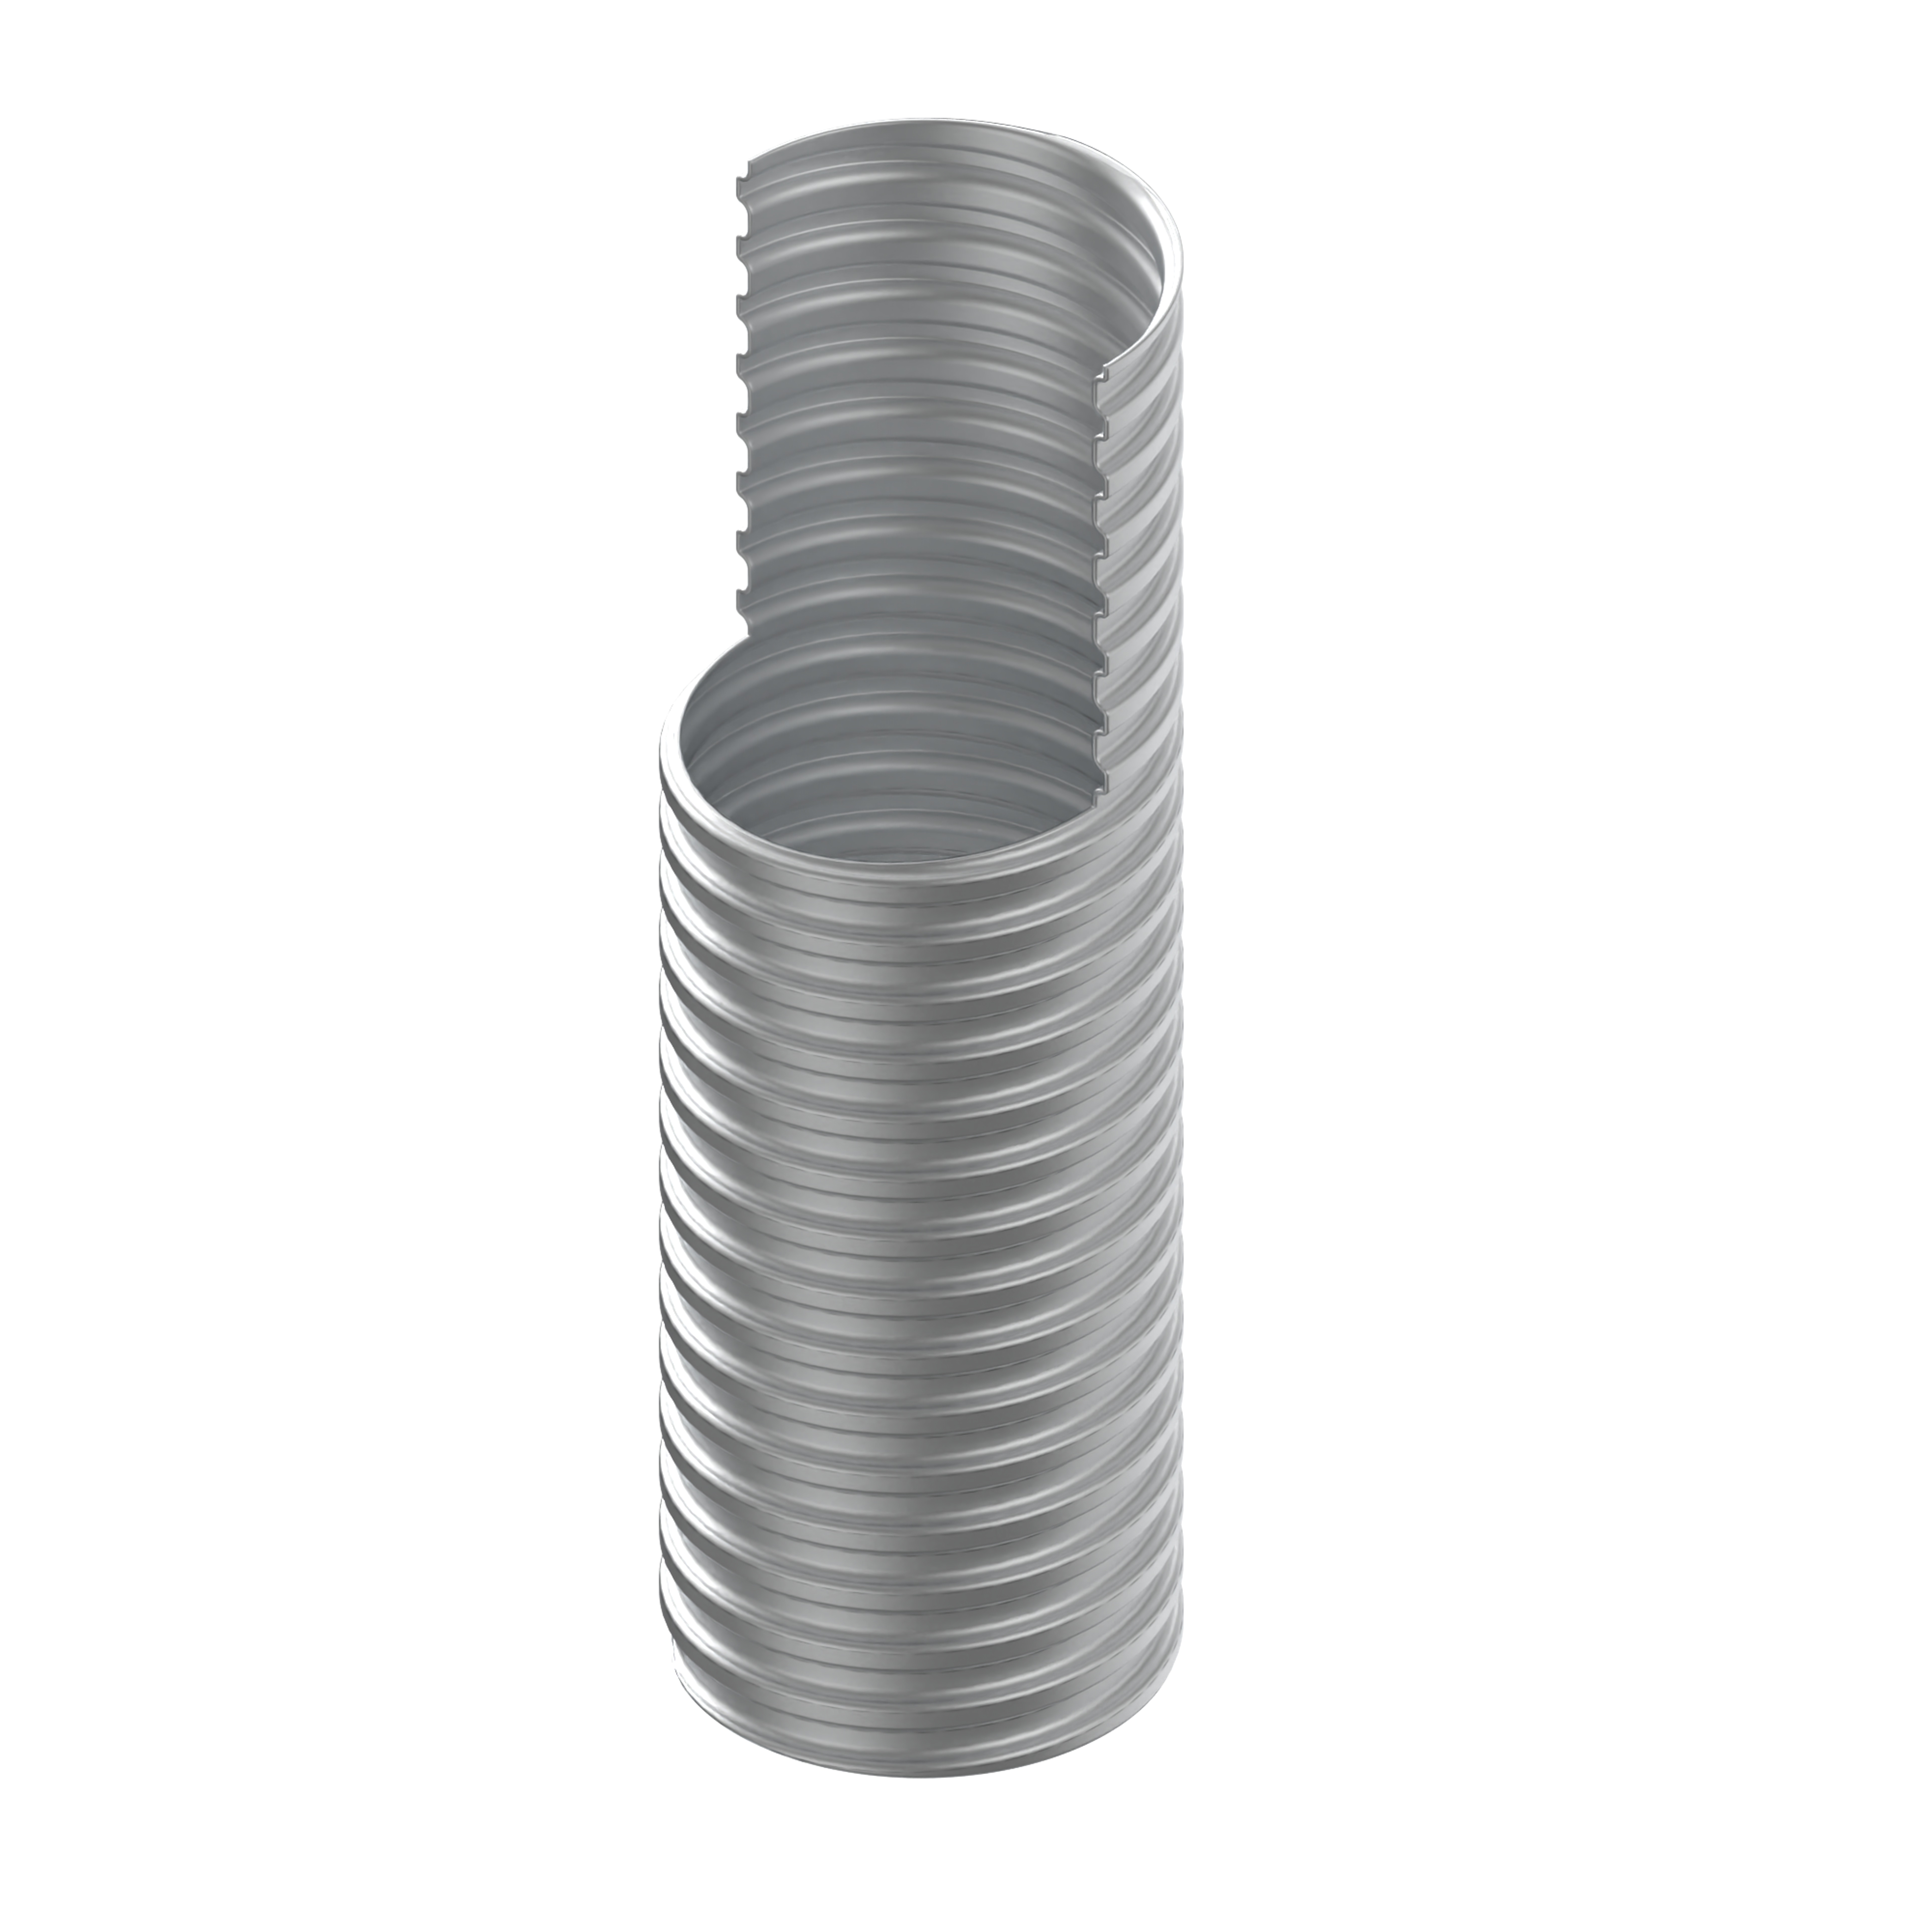 Round well void tube real render